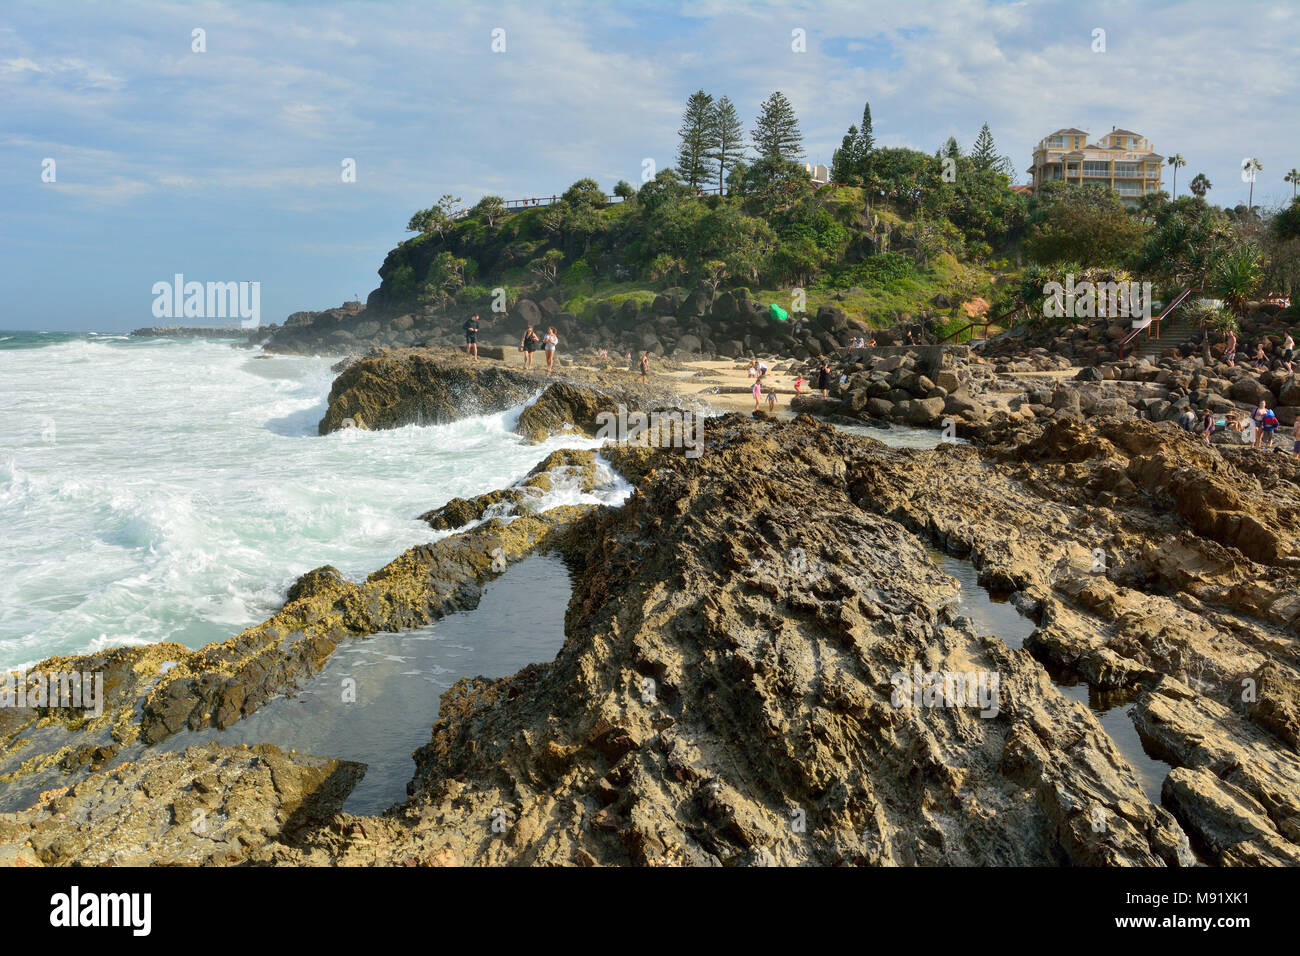 Tweed Heads, Gold Coast, Queensland, Australia - January 13, 2018. Rocky coastline at Point Danger headland on the Gold Coast of Queensland, with peop Stock Photo